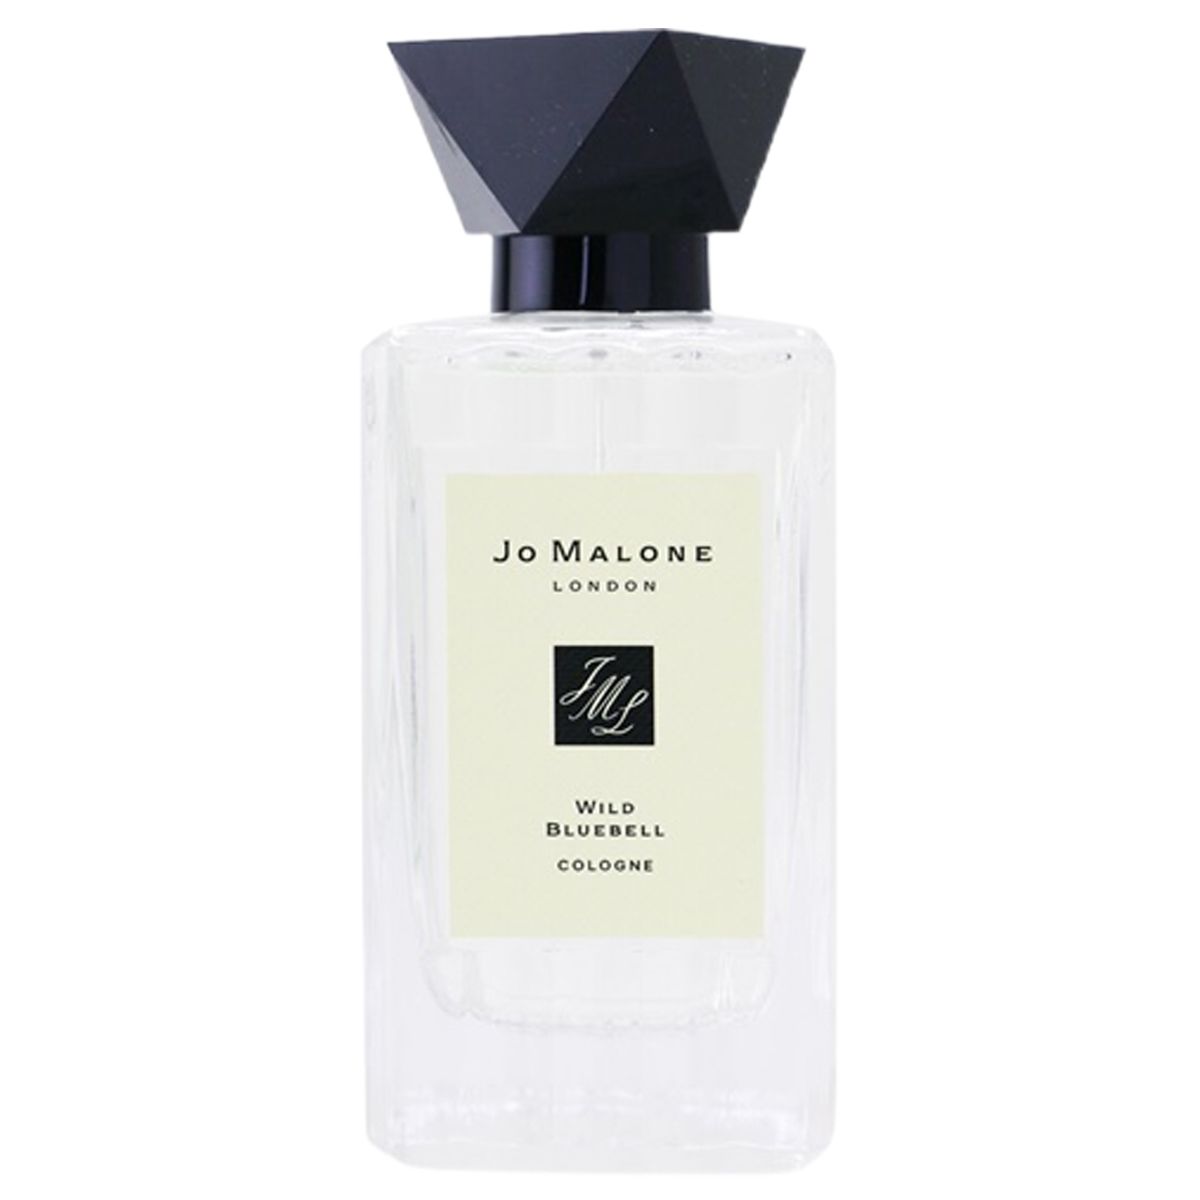  Jo Malone London Wild Bluebell Cologne Limited Edition 